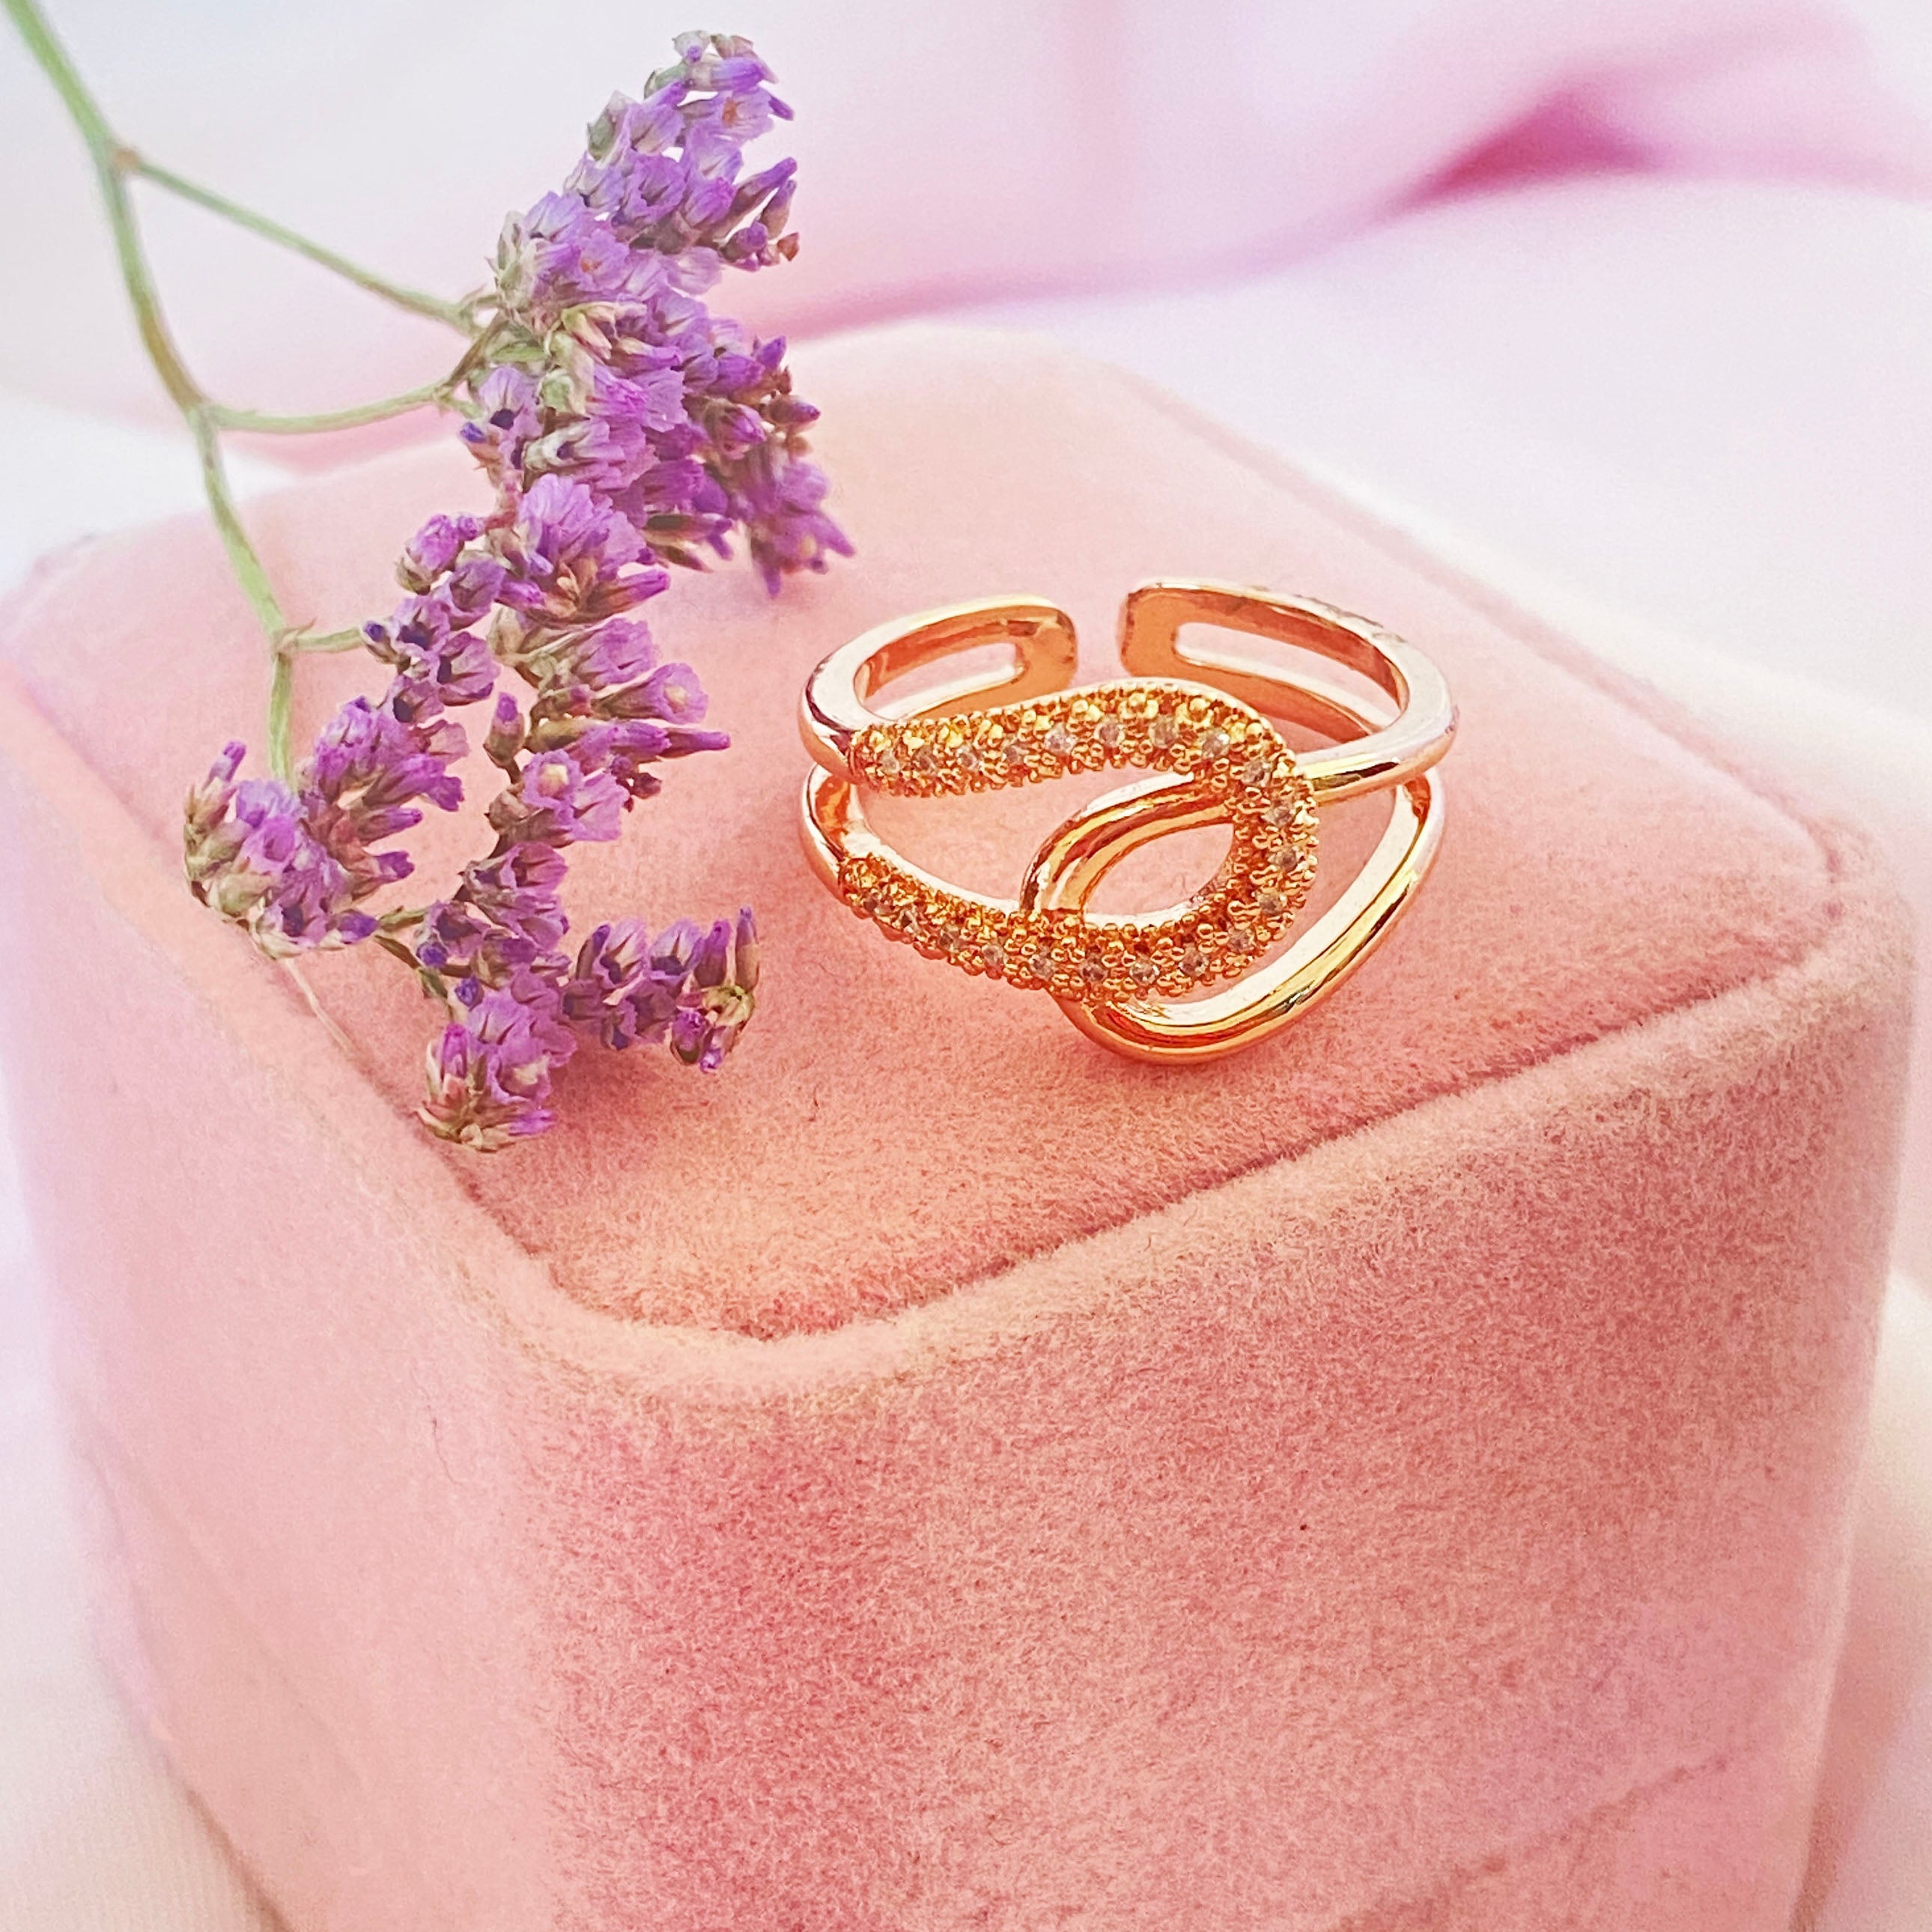 Are Rose Gold Engagement Rings More Expensive? - Silver Spring Jewelers